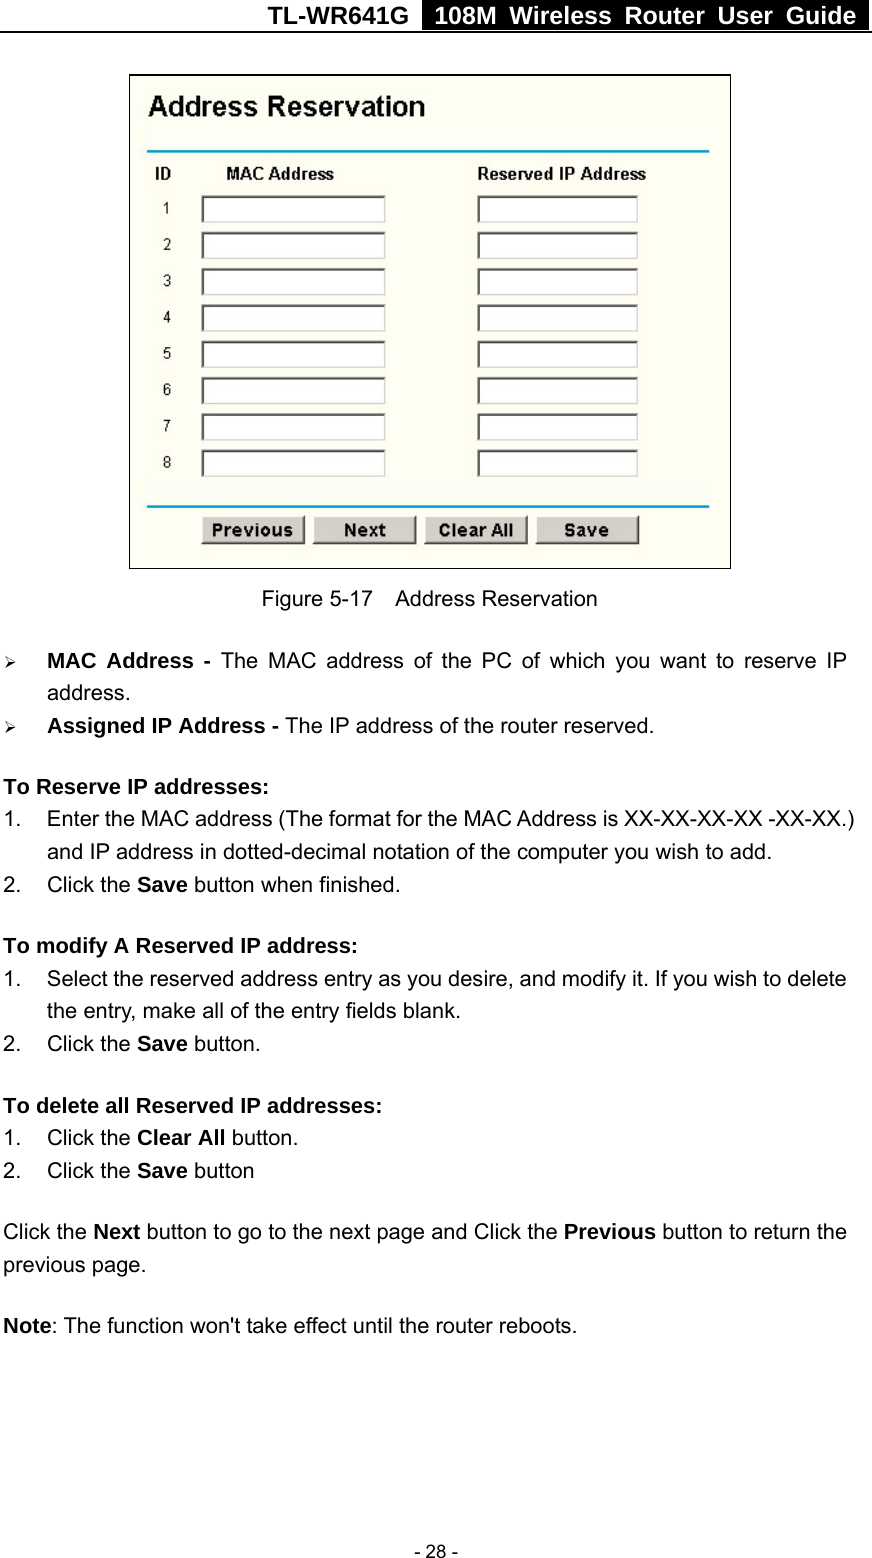 TL-WR641G   108M Wireless Router User Guide   - 28 - Figure 5-17  Address Reservation ¾ MAC Address - The MAC address of the PC of which you want to reserve IP address. ¾ Assigned IP Address - The IP address of the router reserved. To Reserve IP addresses:  1.  Enter the MAC address (The format for the MAC Address is XX-XX-XX-XX -XX-XX.) and IP address in dotted-decimal notation of the computer you wish to add.   2. Click the Save button when finished.   To modify A Reserved IP address:  1.  Select the reserved address entry as you desire, and modify it. If you wish to delete the entry, make all of the entry fields blank. 2. Click the Save button.   To delete all Reserved IP addresses: 1. Click the Clear All button. 2. Click the Save button Click the Next button to go to the next page and Click the Previous button to return the previous page. Note: The function won&apos;t take effect until the router reboots. 